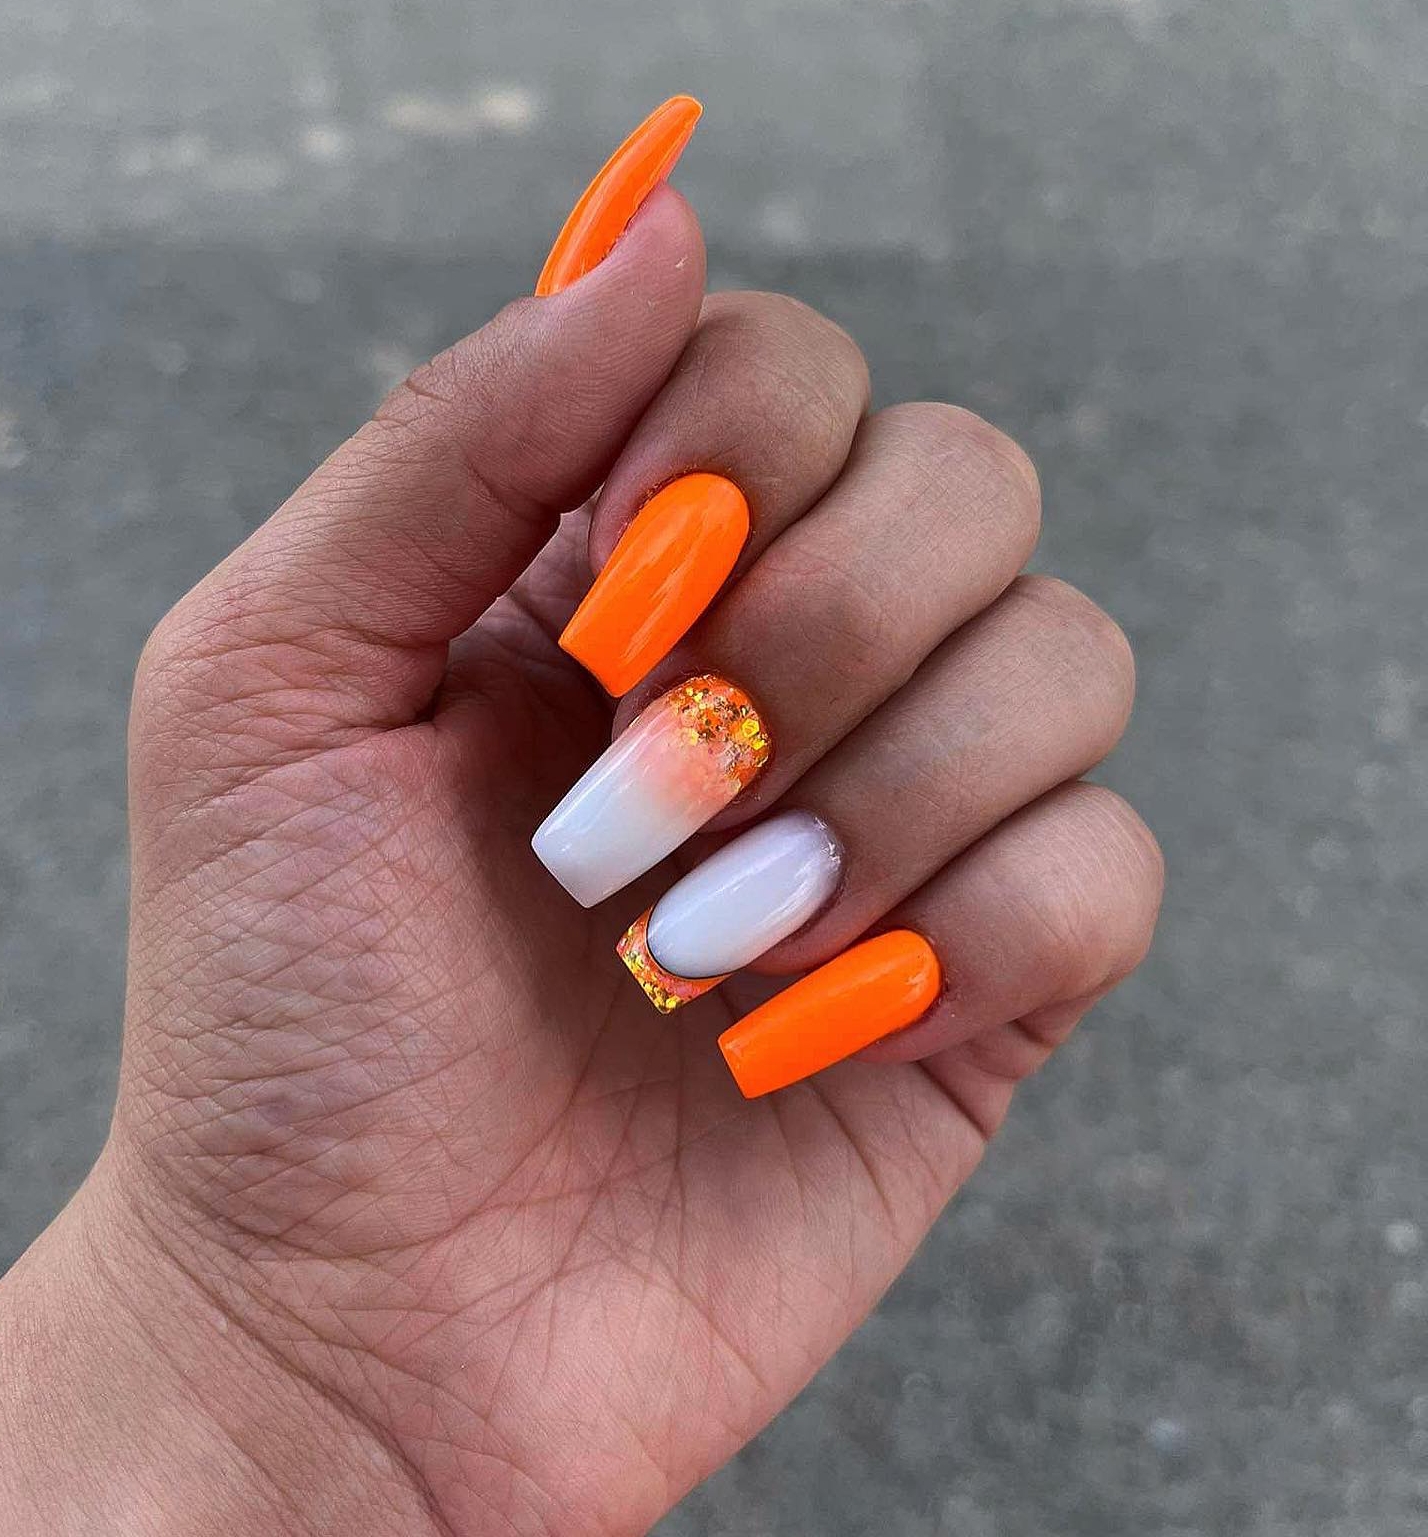 Long Square Orange and White Nails with Glitter